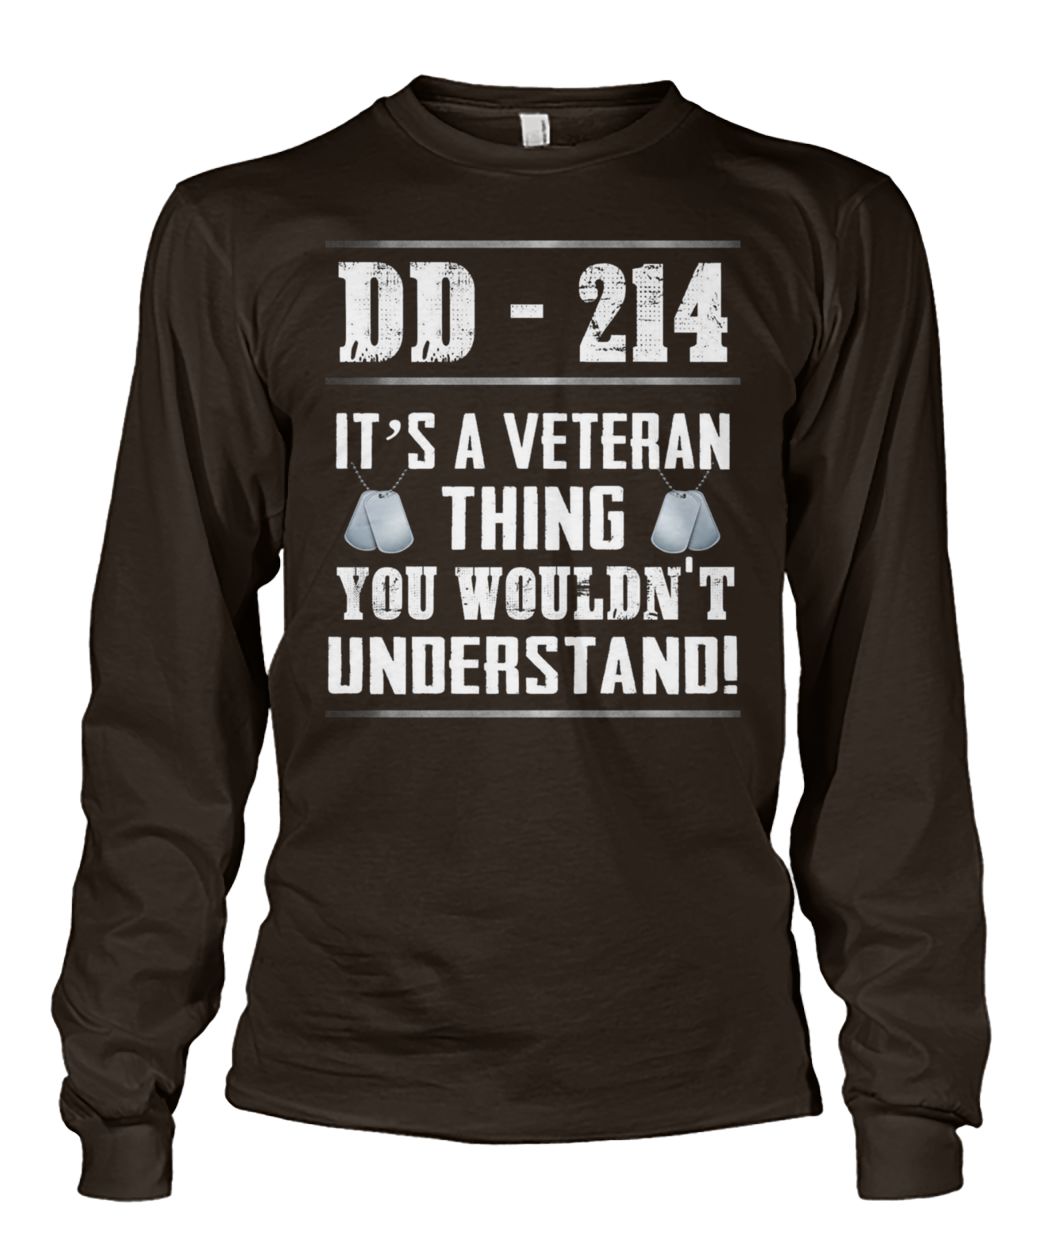 DD-214 it's a veteran thing you wouldn't understand longsleeve tee